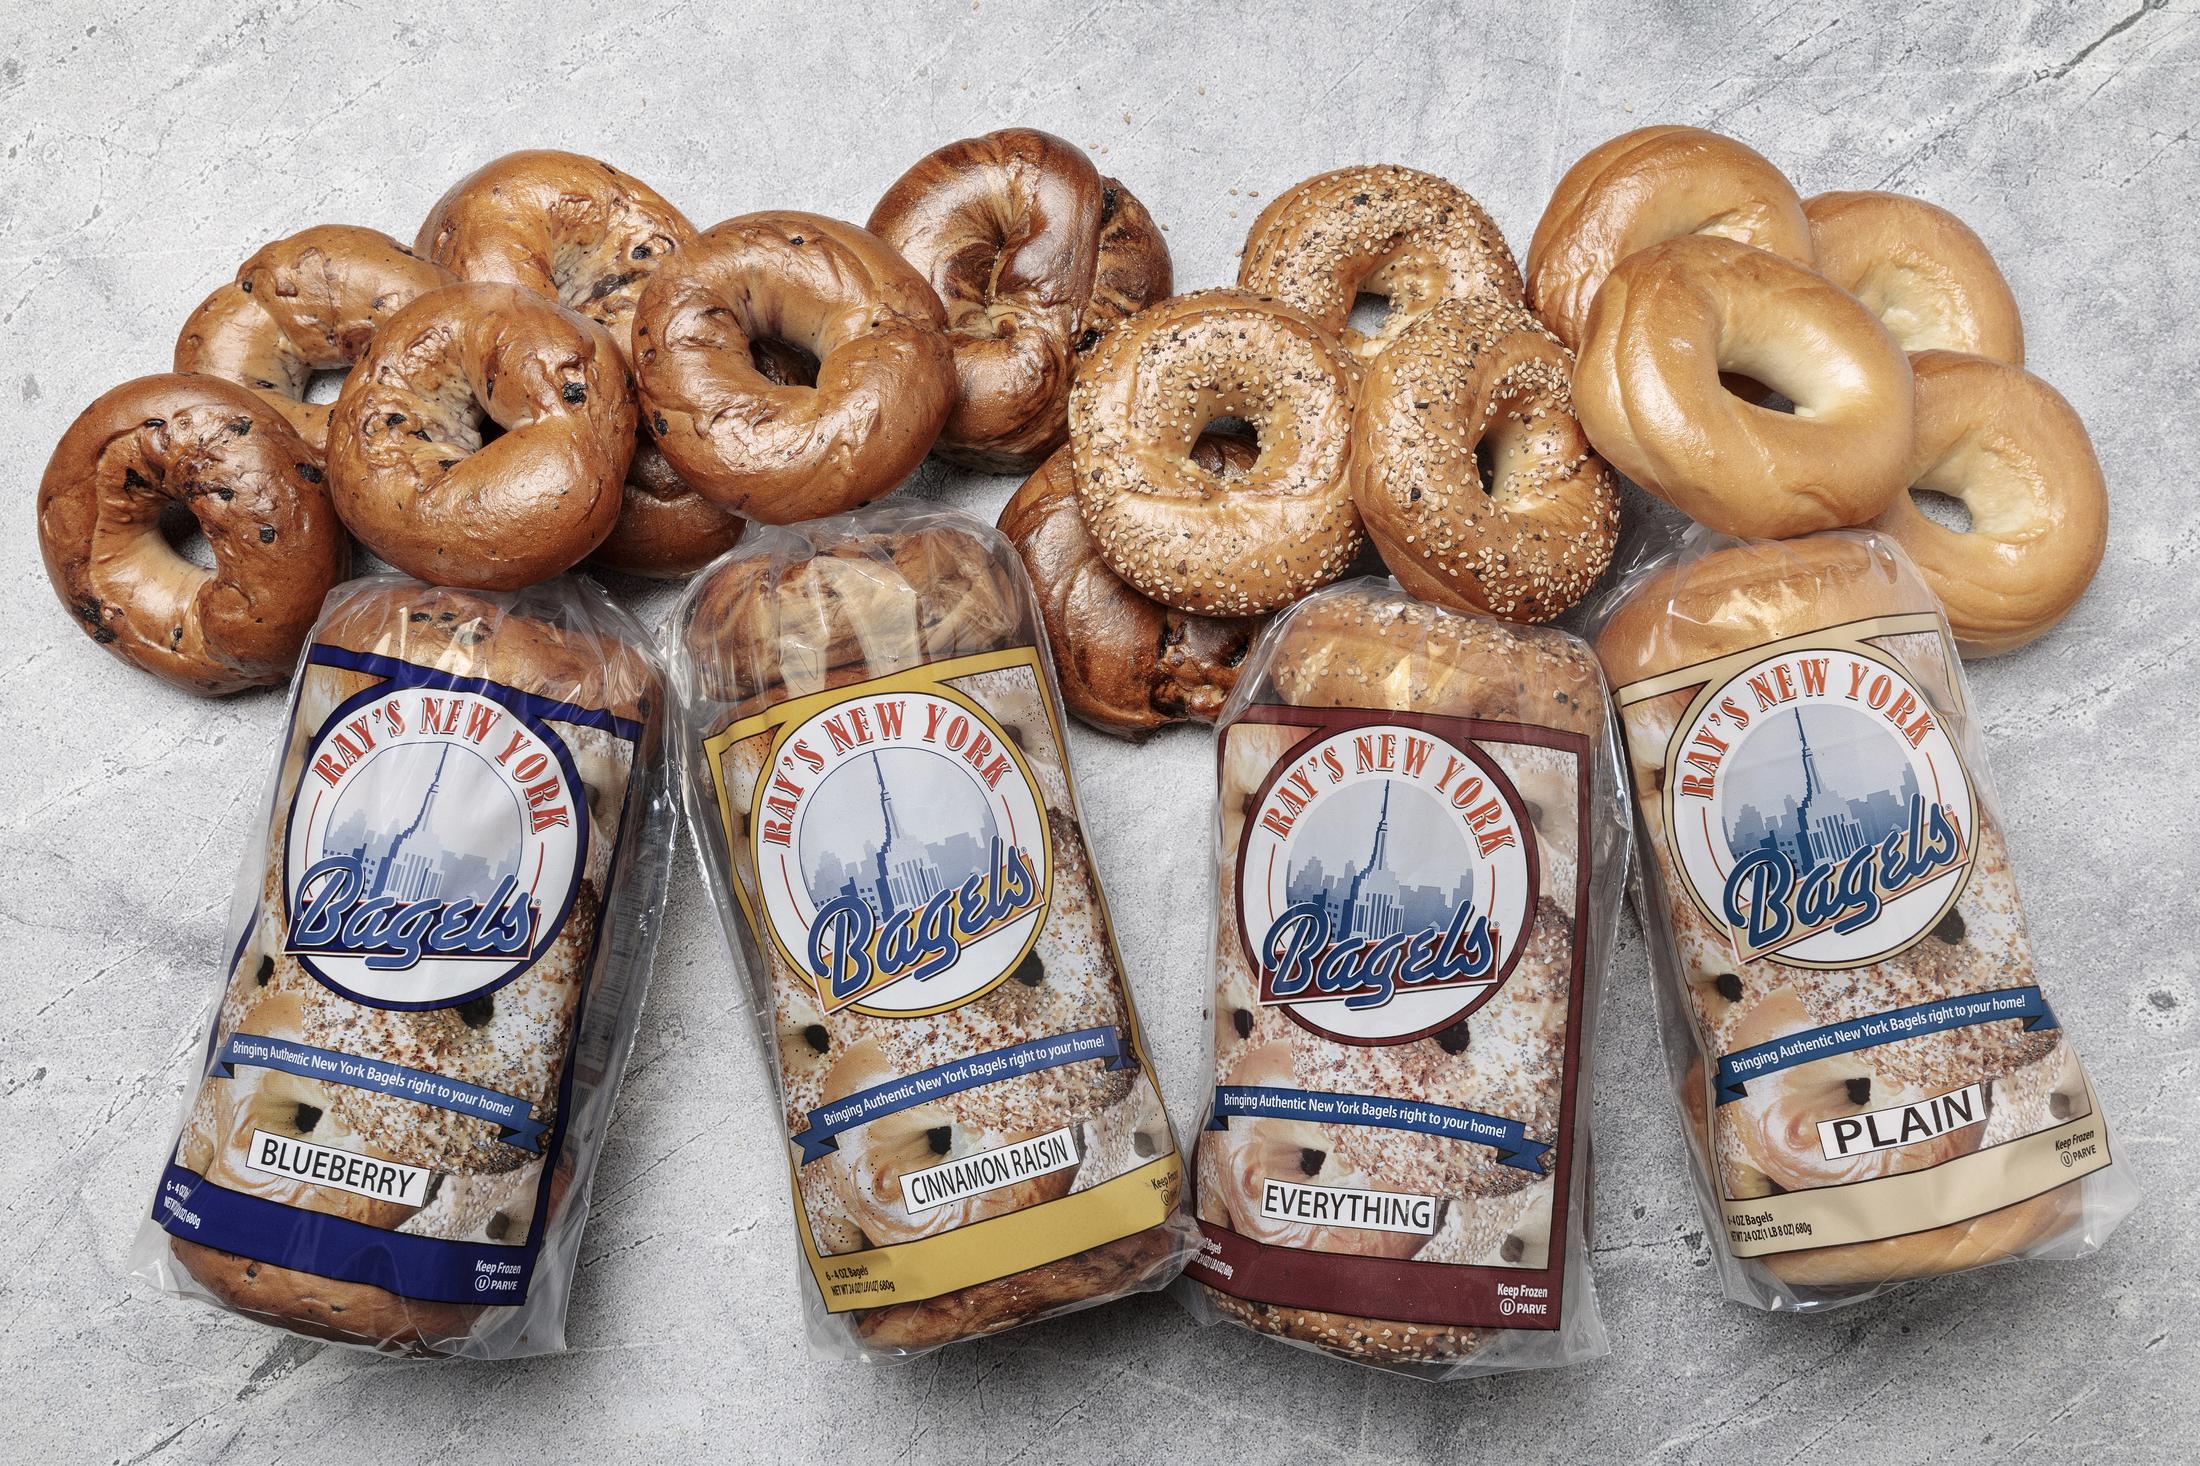 Ray's New York Bagels, Blueberry Bagels, 6 Count, 4 oz (Frozen) - image 4 of 4